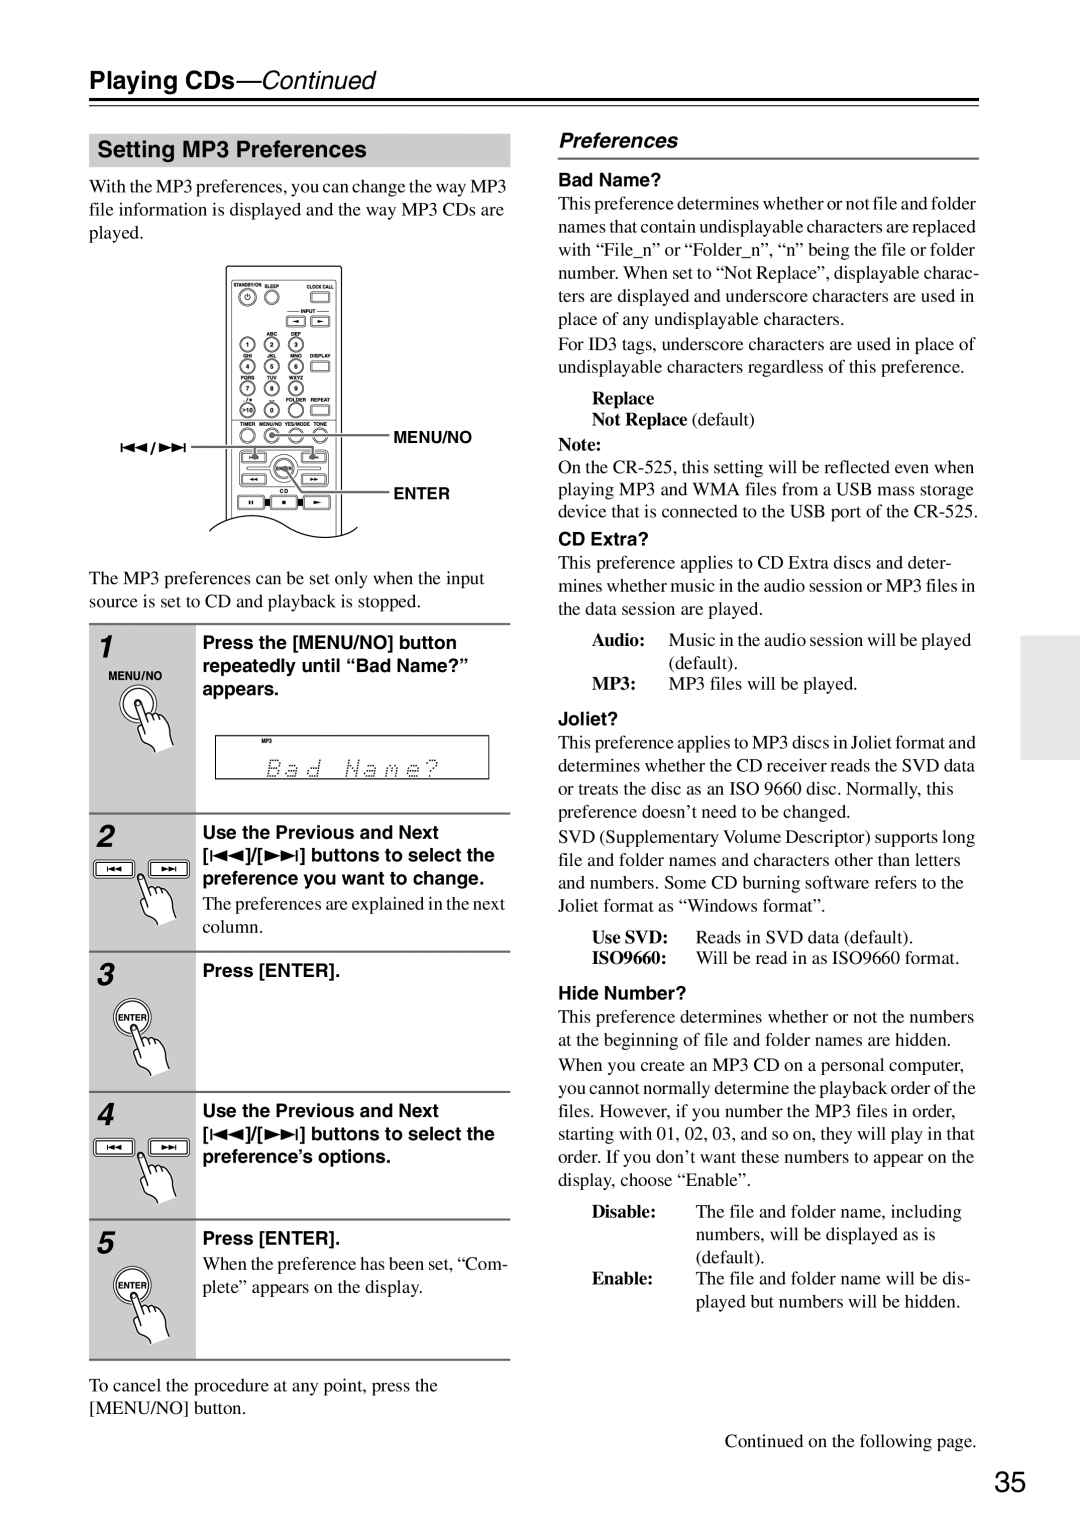 Onkyo CR-525, CR-325 instruction manual Setting MP3 Preferences, Playing CDs-Continued, Replace Not Replace default, column 